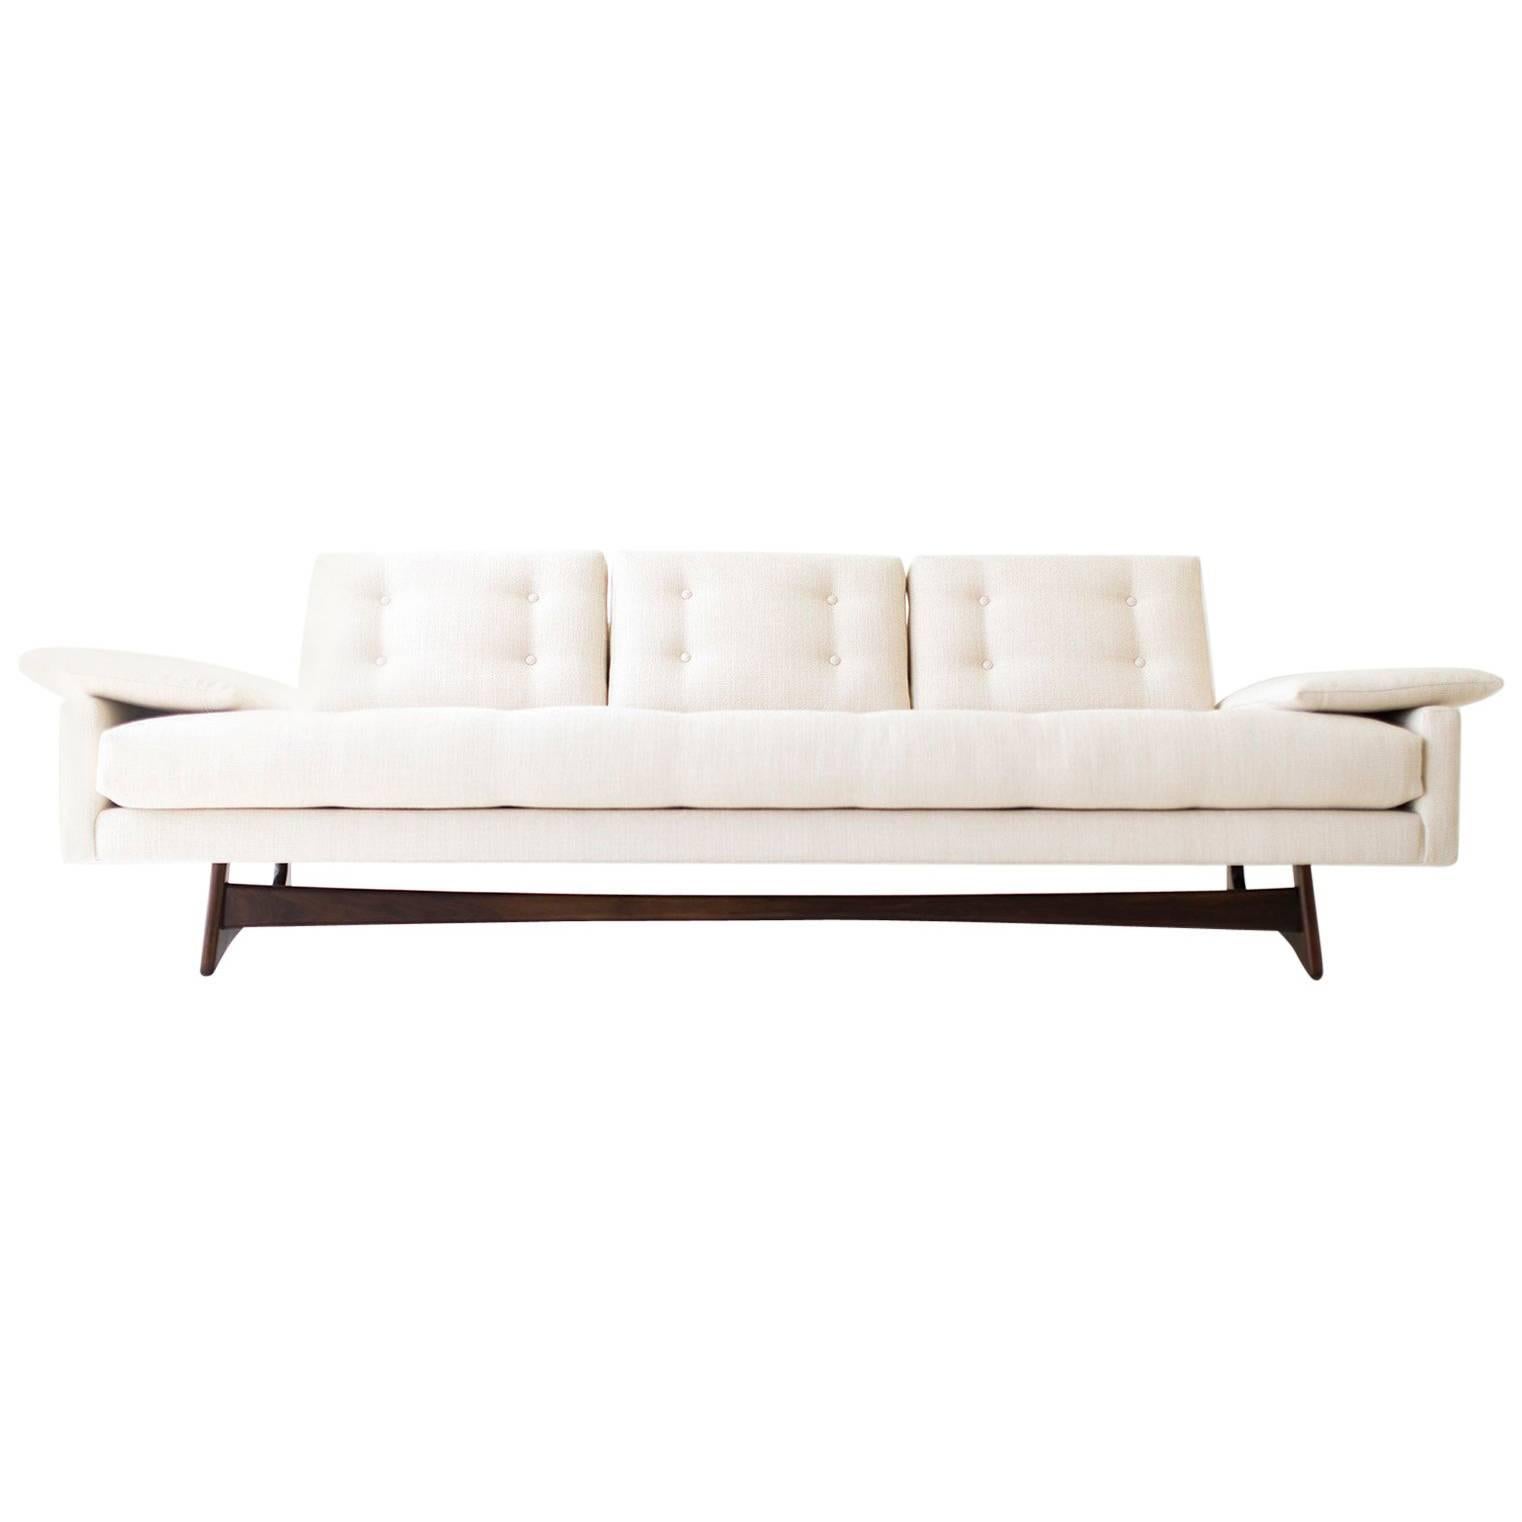 Adrian Pearsall Sofas for Craft Associates Inc., Model 2408-S